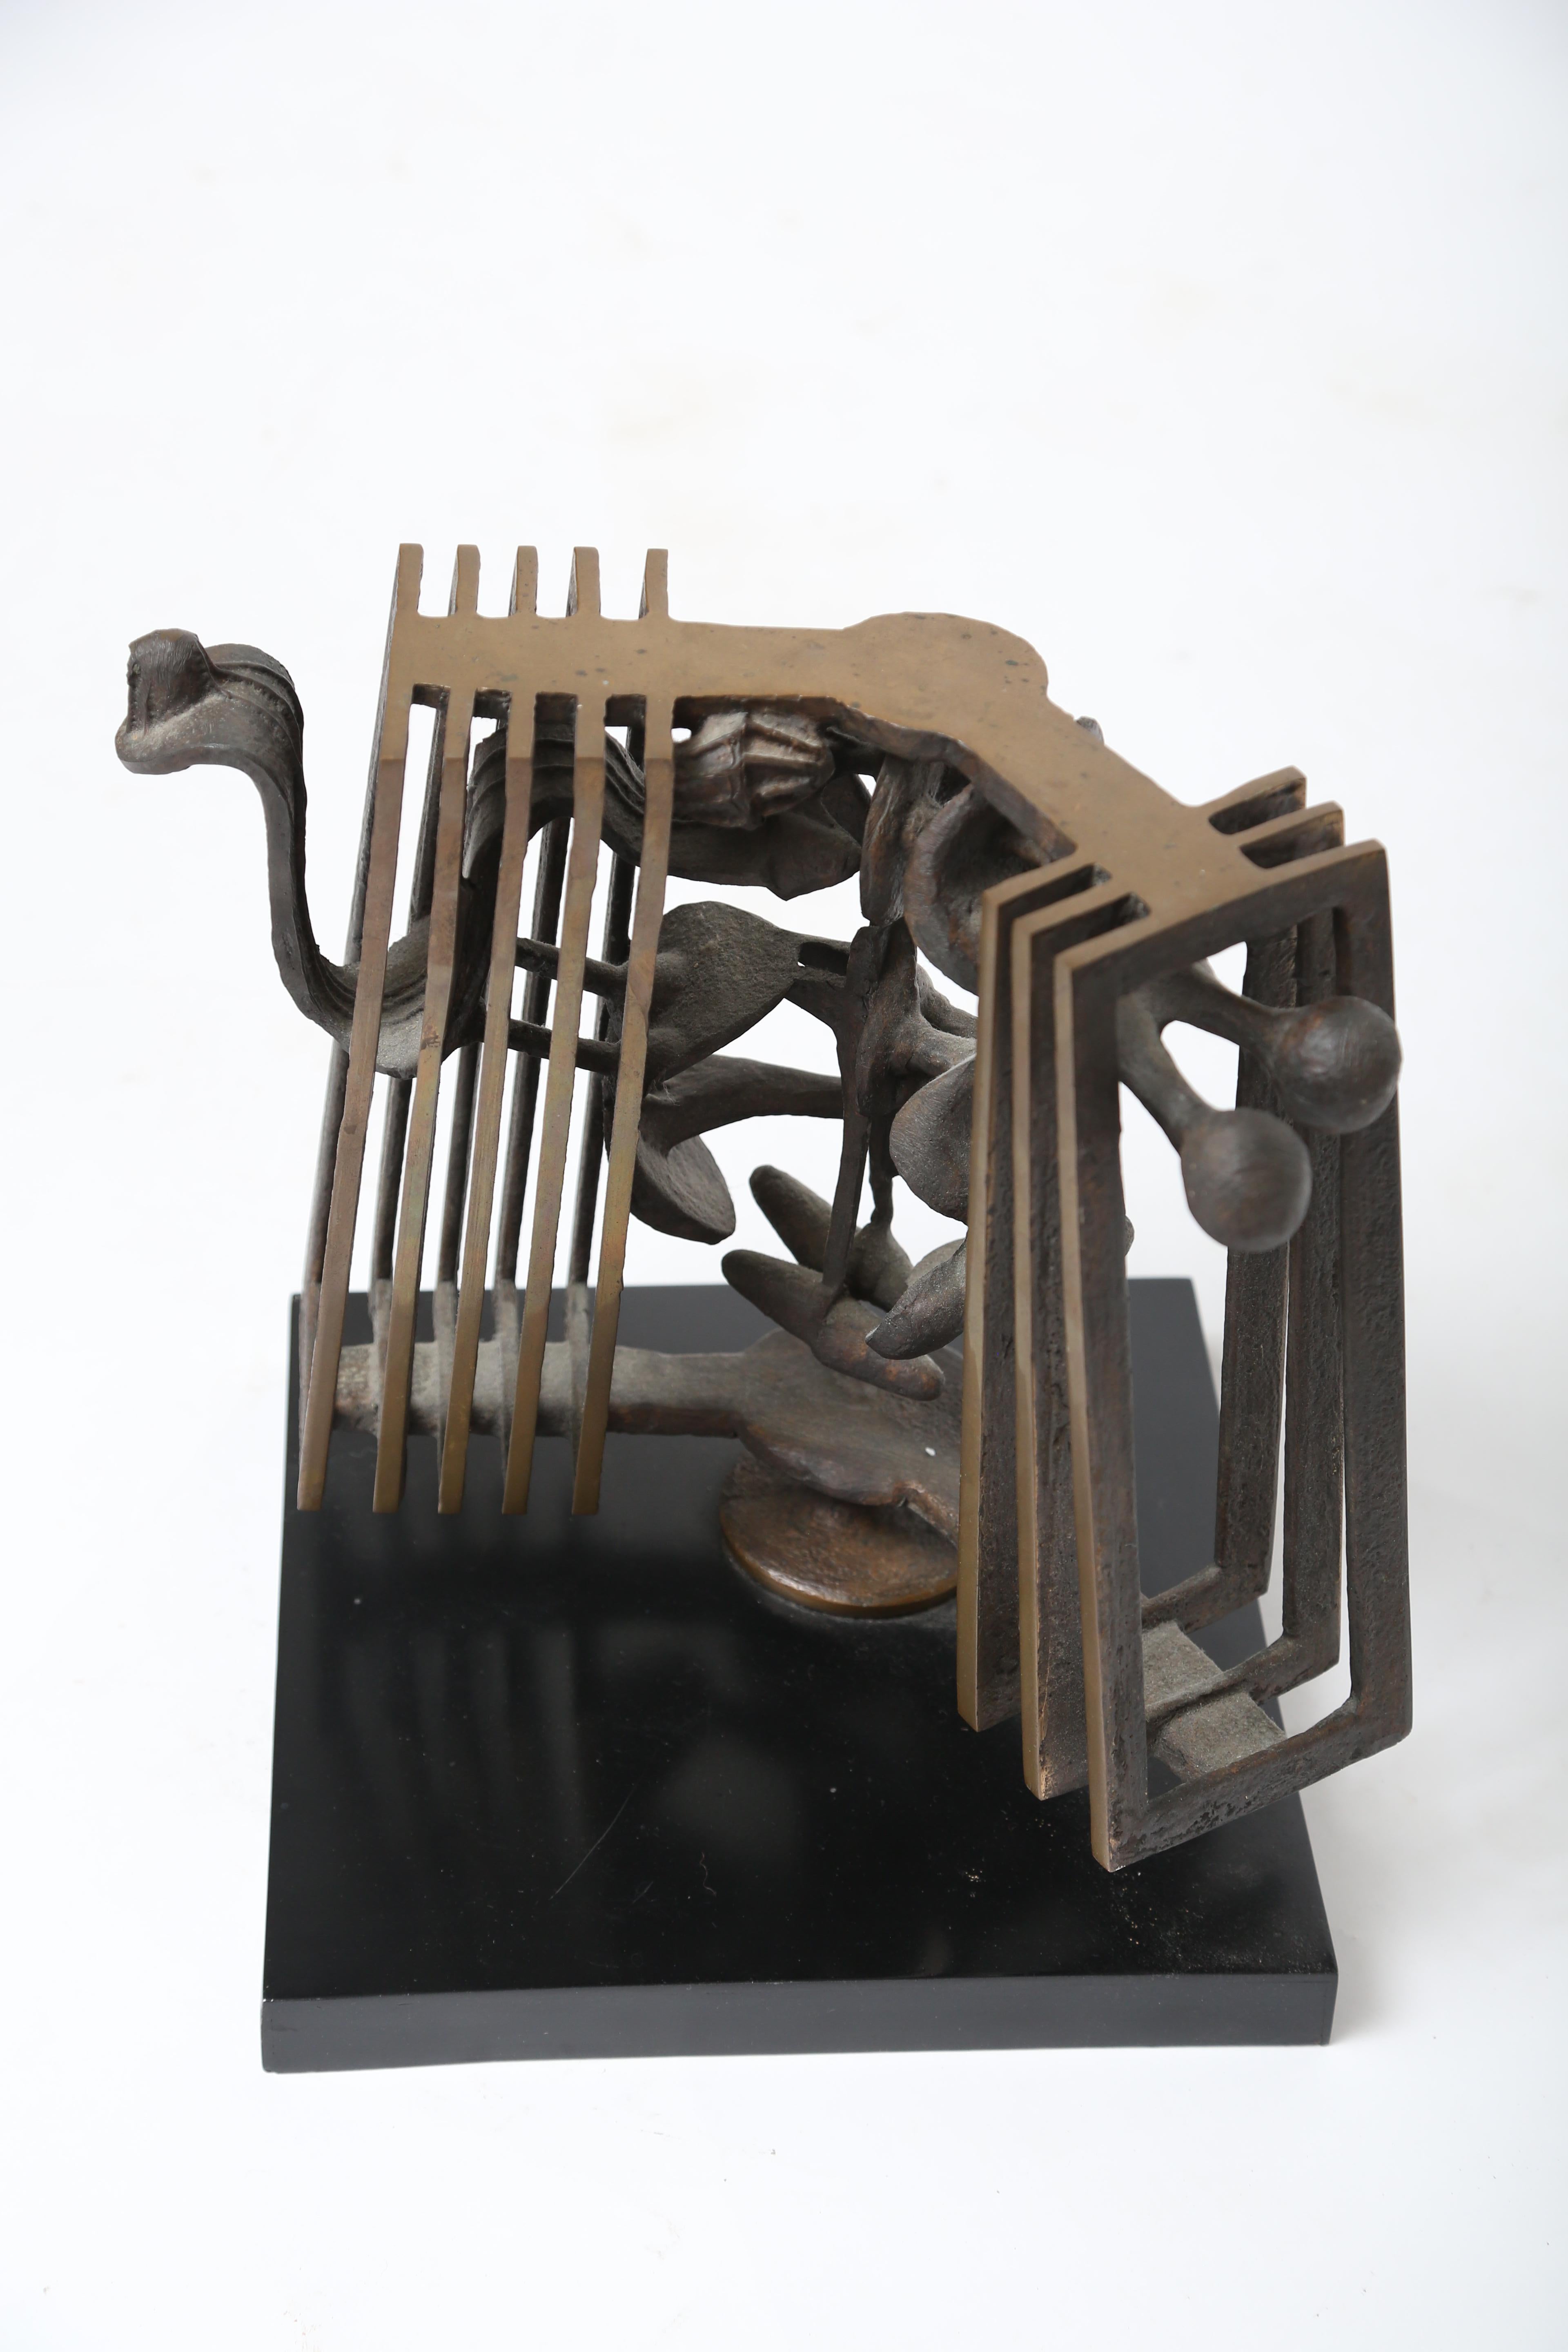 Rodger Mack was a graduate of Cranbrook Acadamy.
He moved to Syracuse in 1968 where 
He was head of the Sculpture Department at Syracuse university.
He established the Triangle Artists workshop with Anthony Caro.
He had numerous exhibitions in